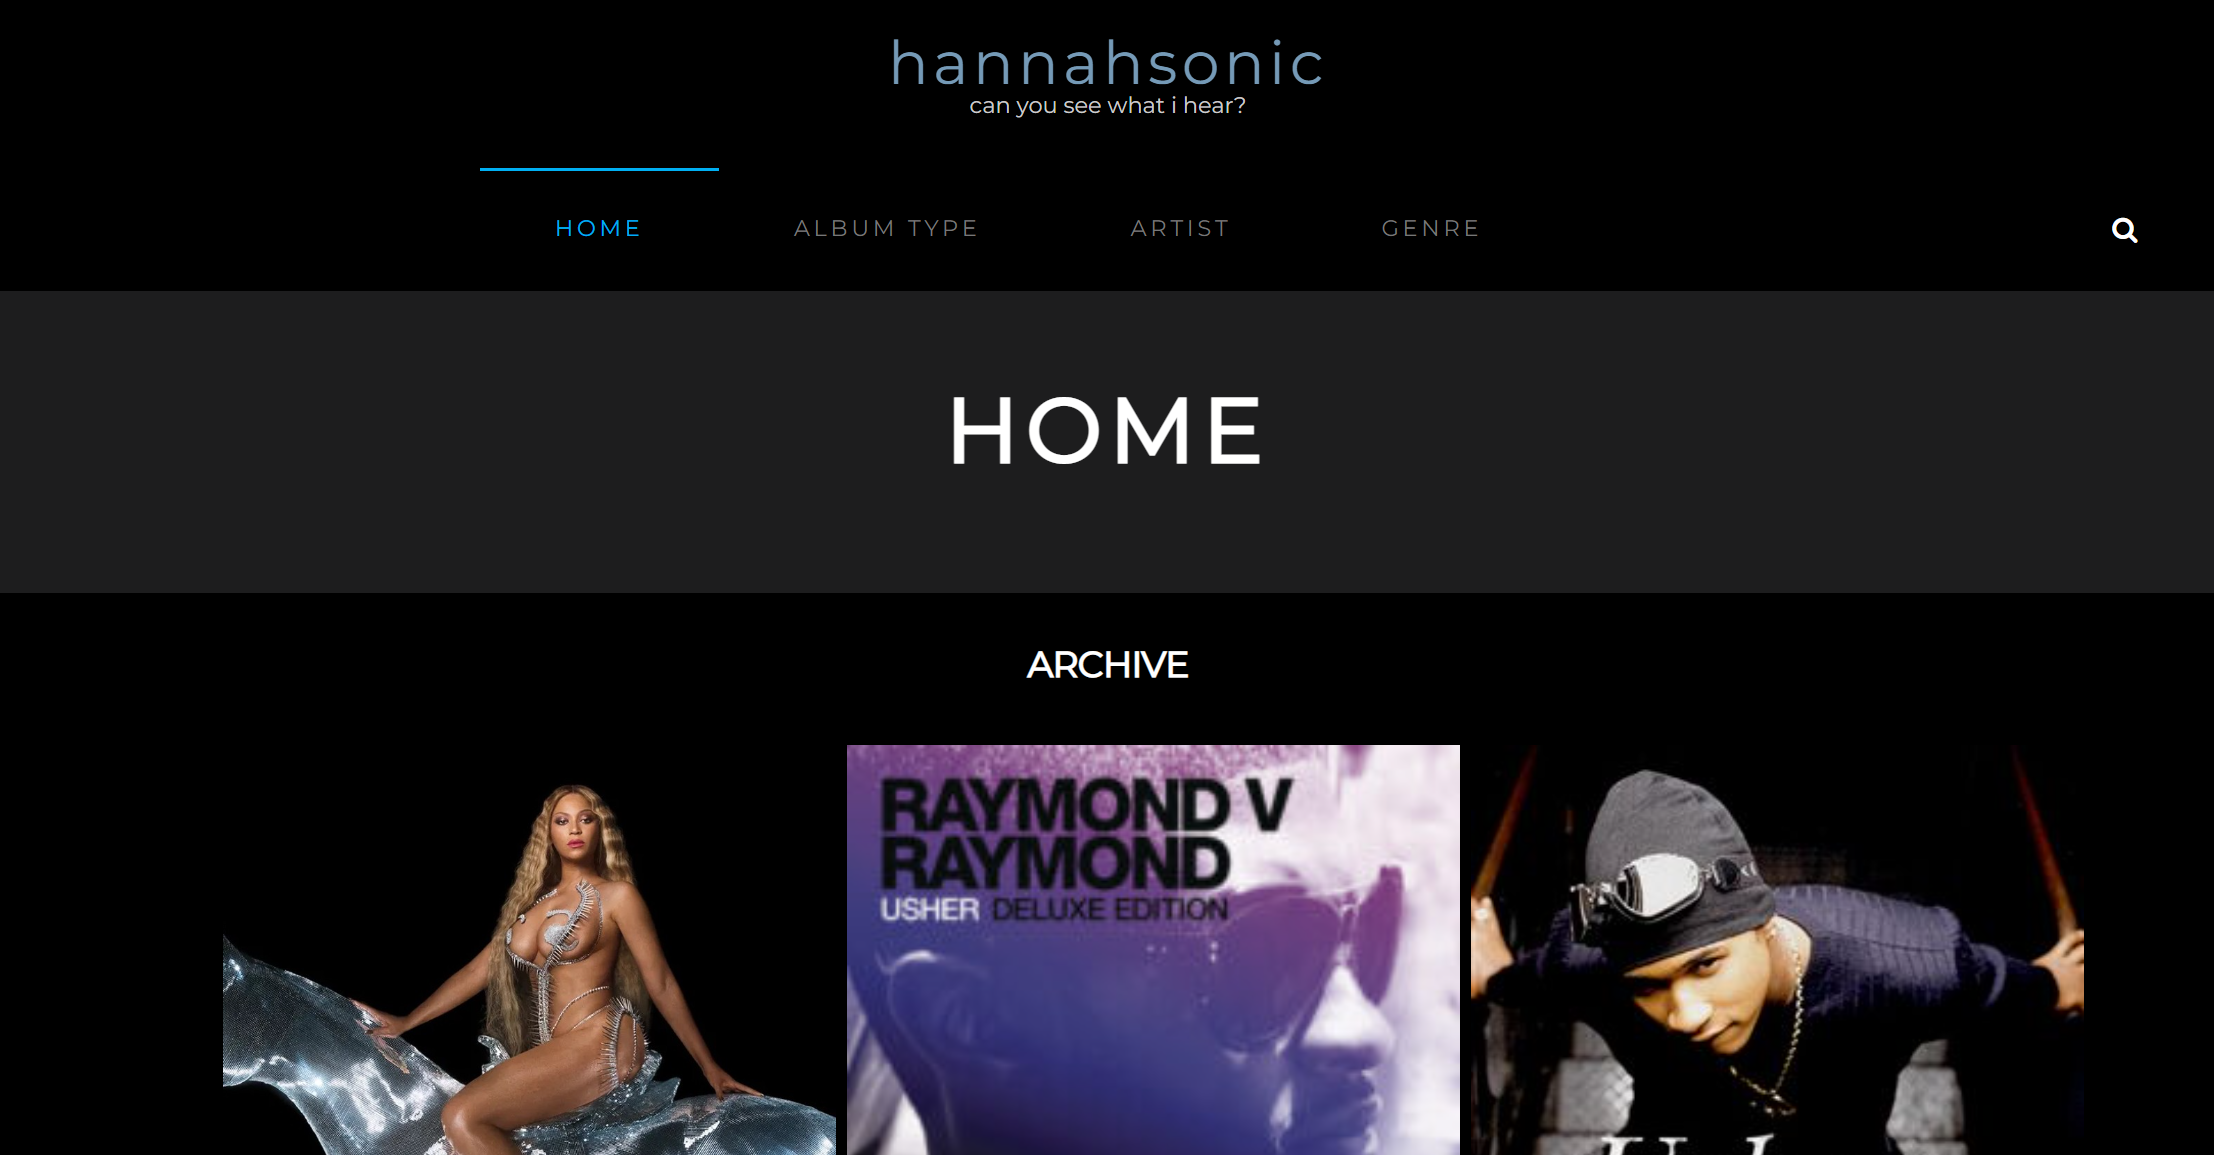 Screenshot of the home page of my album review site, featuring the covers of Beyonce's "Renaissance", Usher's "Raymond vs Raymond Deluxe Edition", and Usher's "My Way".